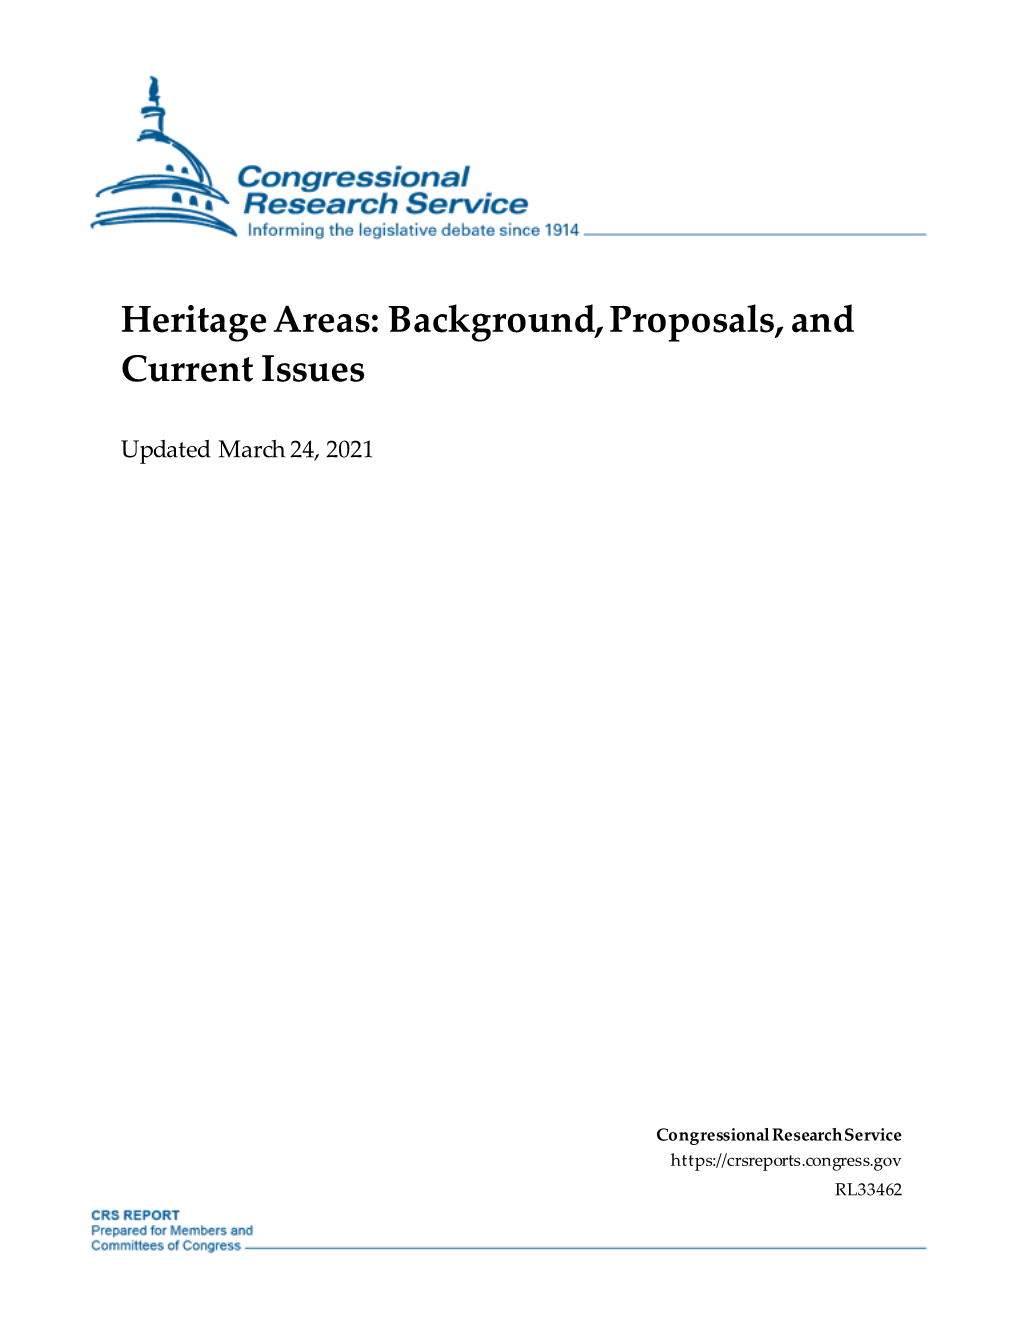 Heritage Areas: Background, Proposals, and Current Issues